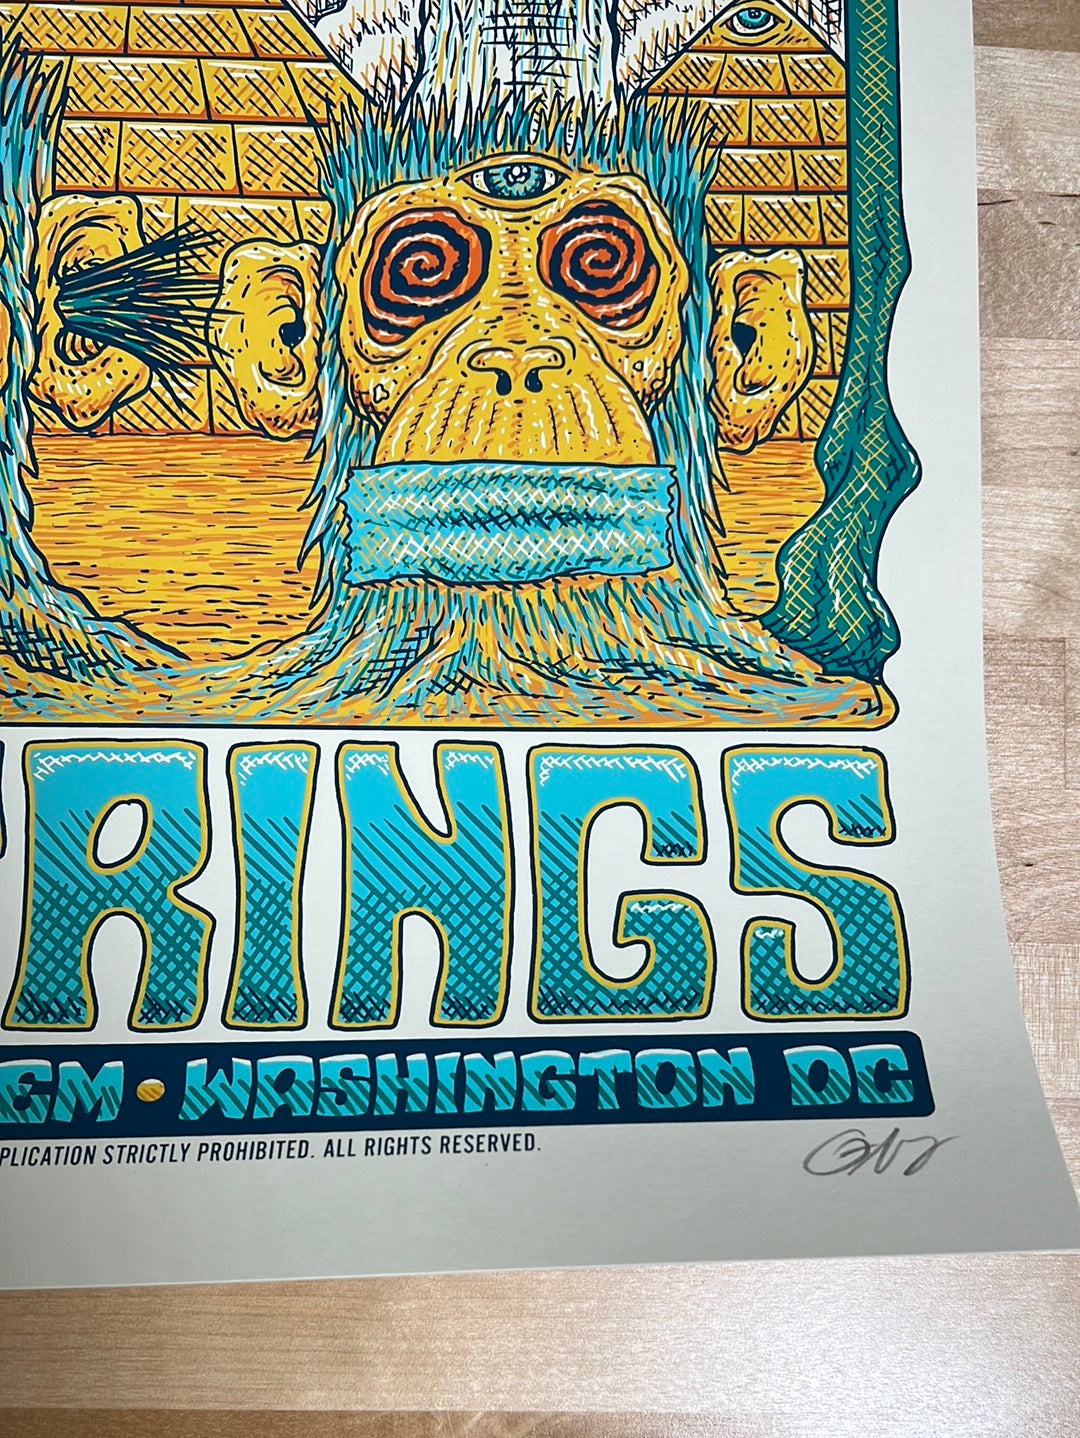 For those interested, we'll have our copies of the official @billystrings  Philly Night 1 and Night 2 posters by artists Acorn and Mark5…